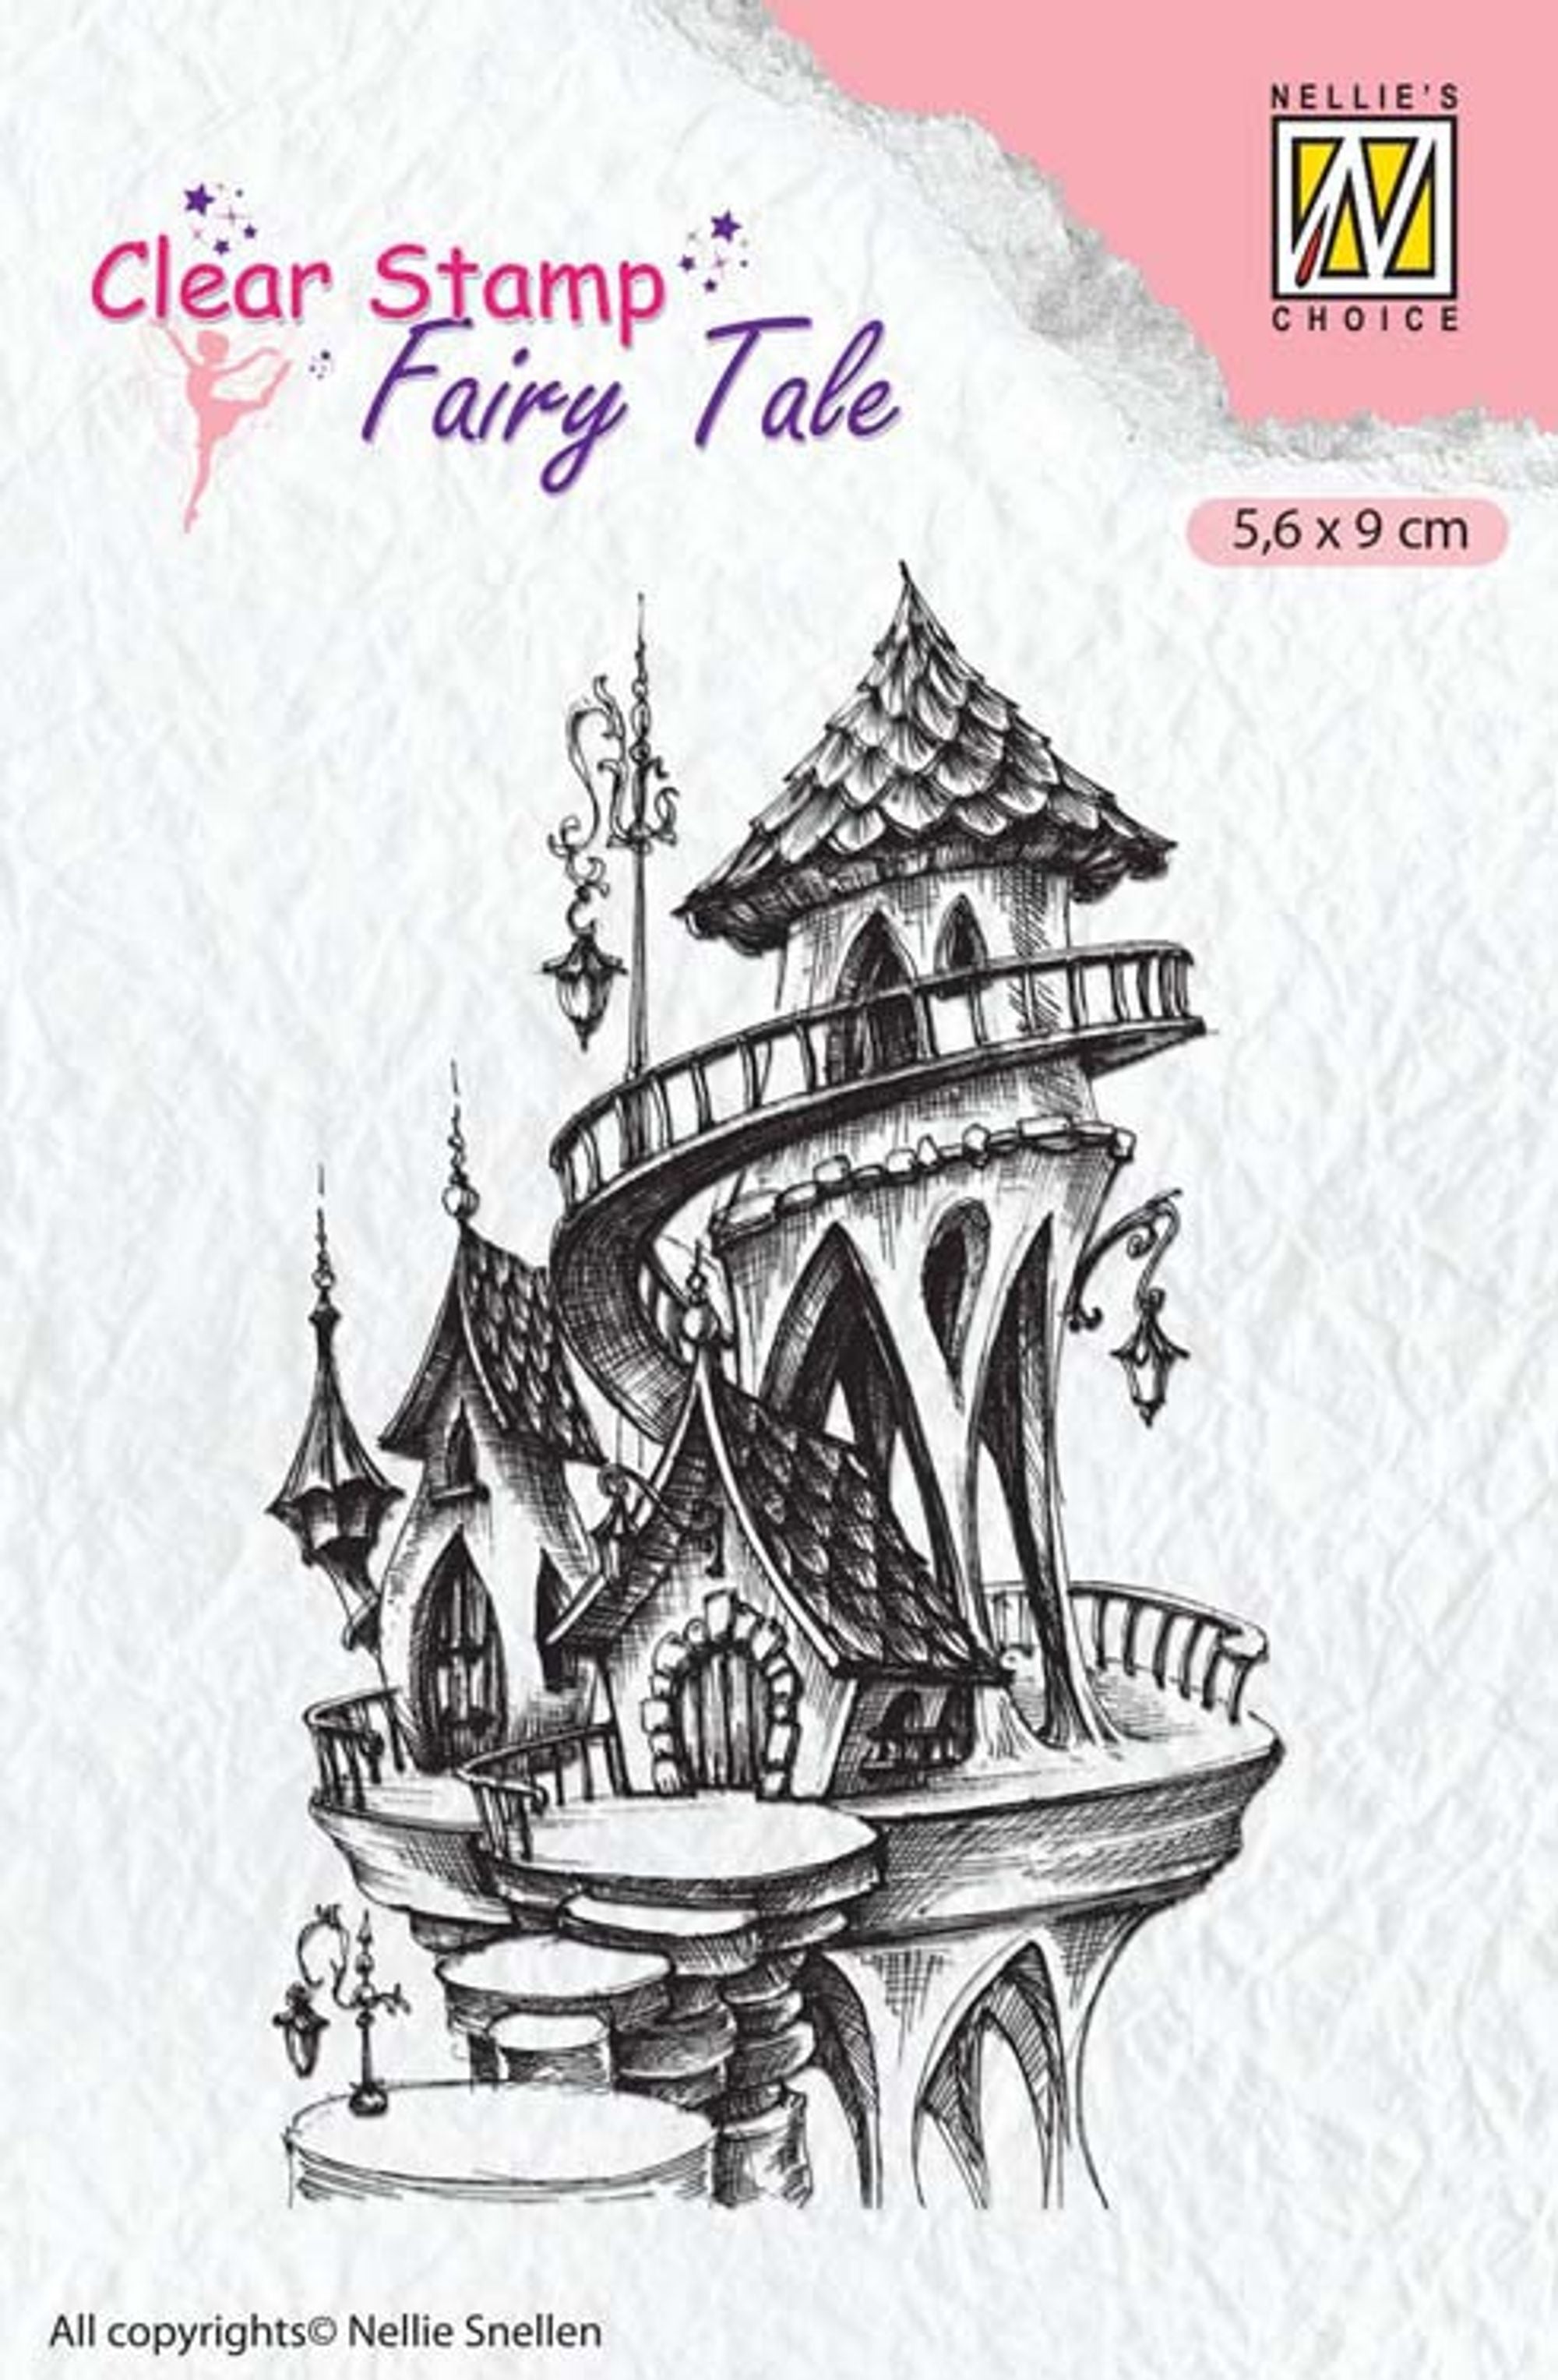 Nellie's Choice Clear Stamp Fairy Tale - Summer Castle